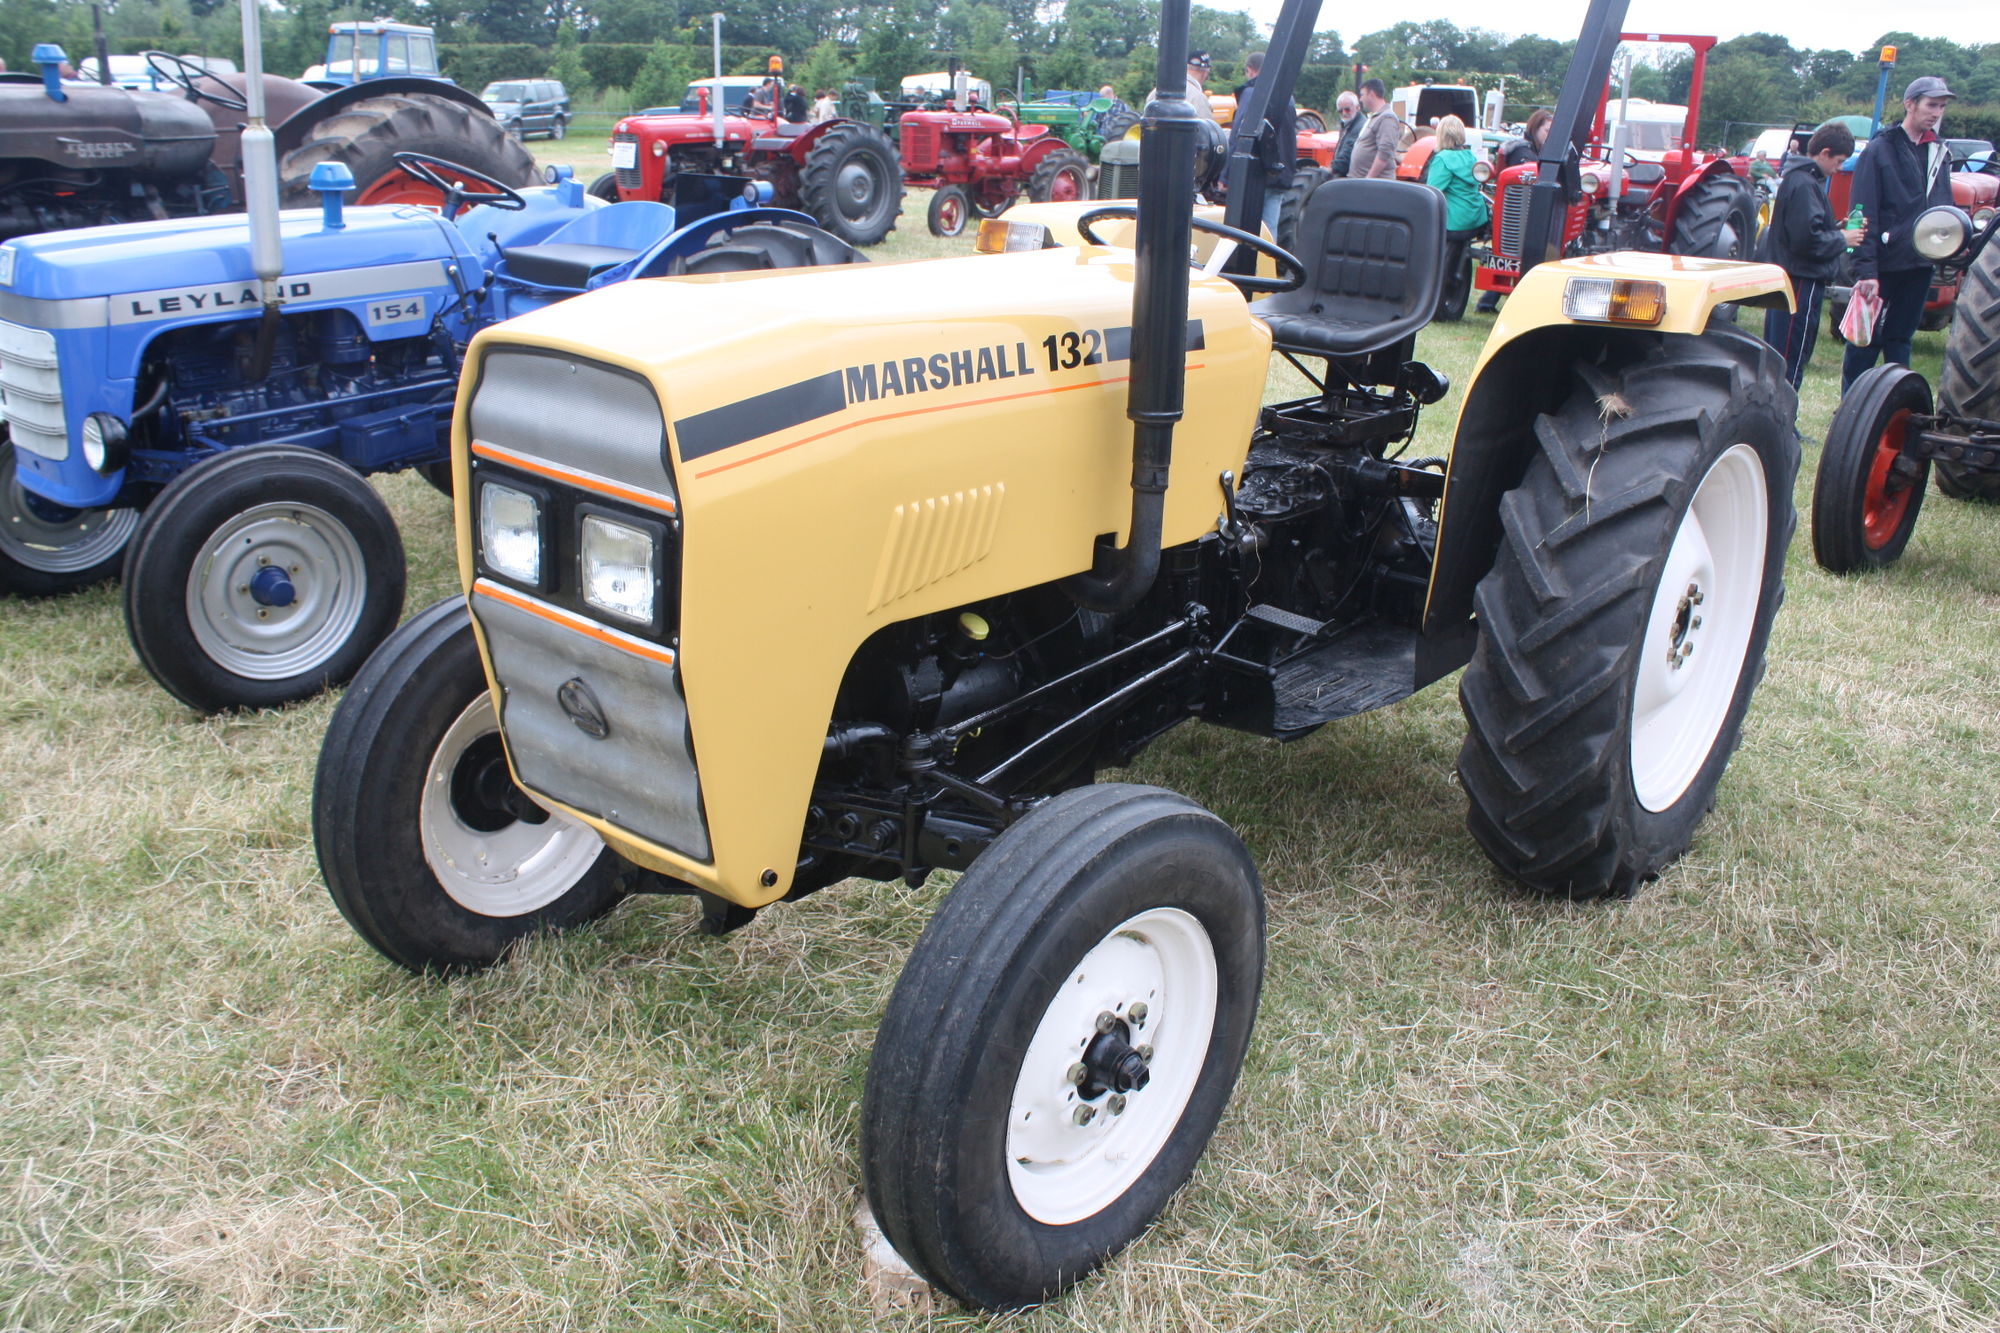 Marshall 132 | Tractor & Construction Plant Wiki | Fandom powered by ...